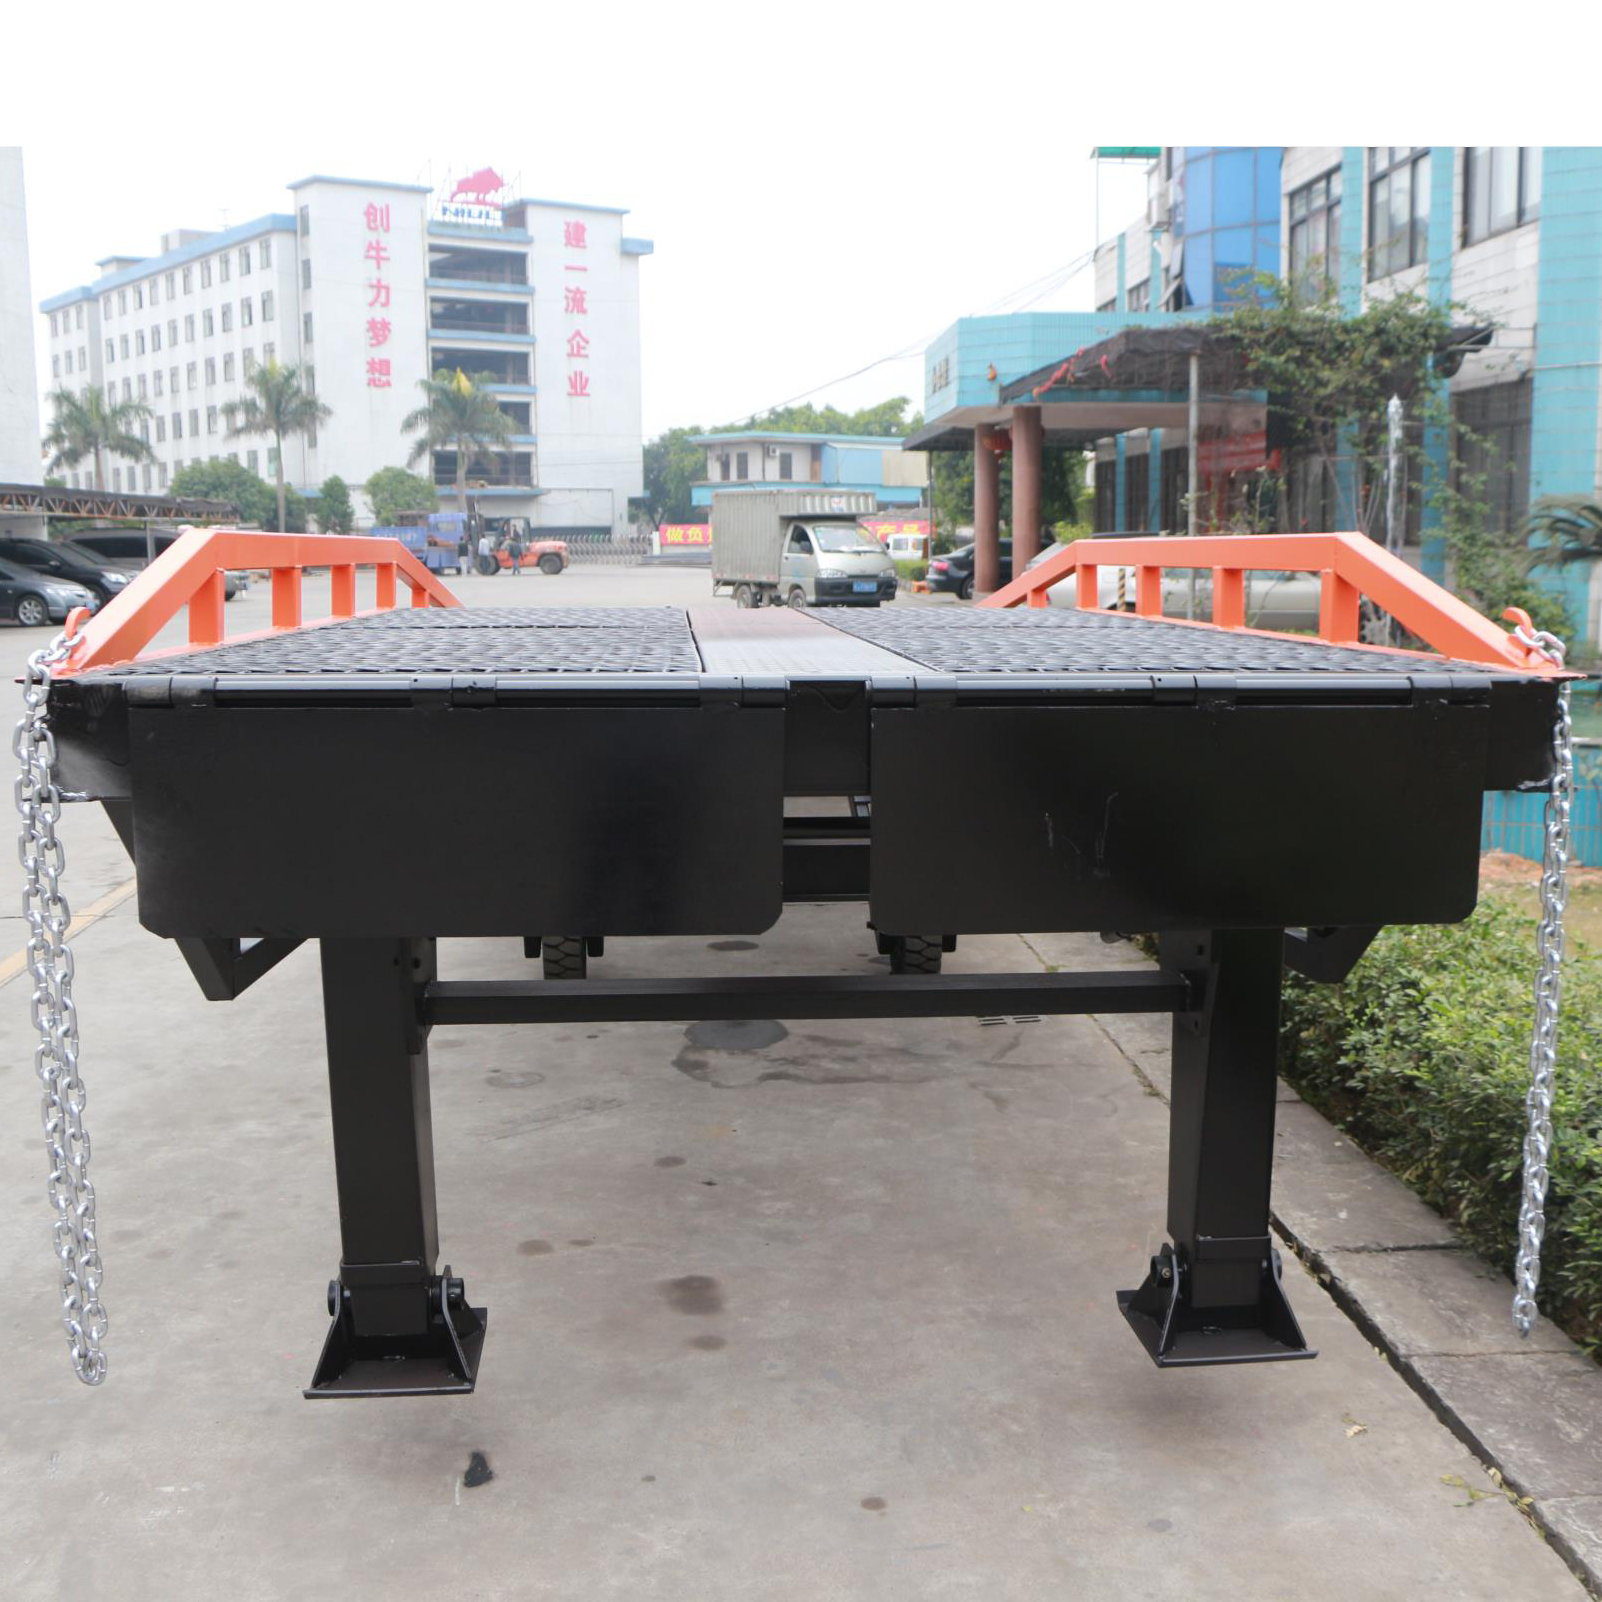 NIULI Factory Container Use Hydraulic Dock Leveler 10 Ton Capacity Dock Ramp For Warehouse